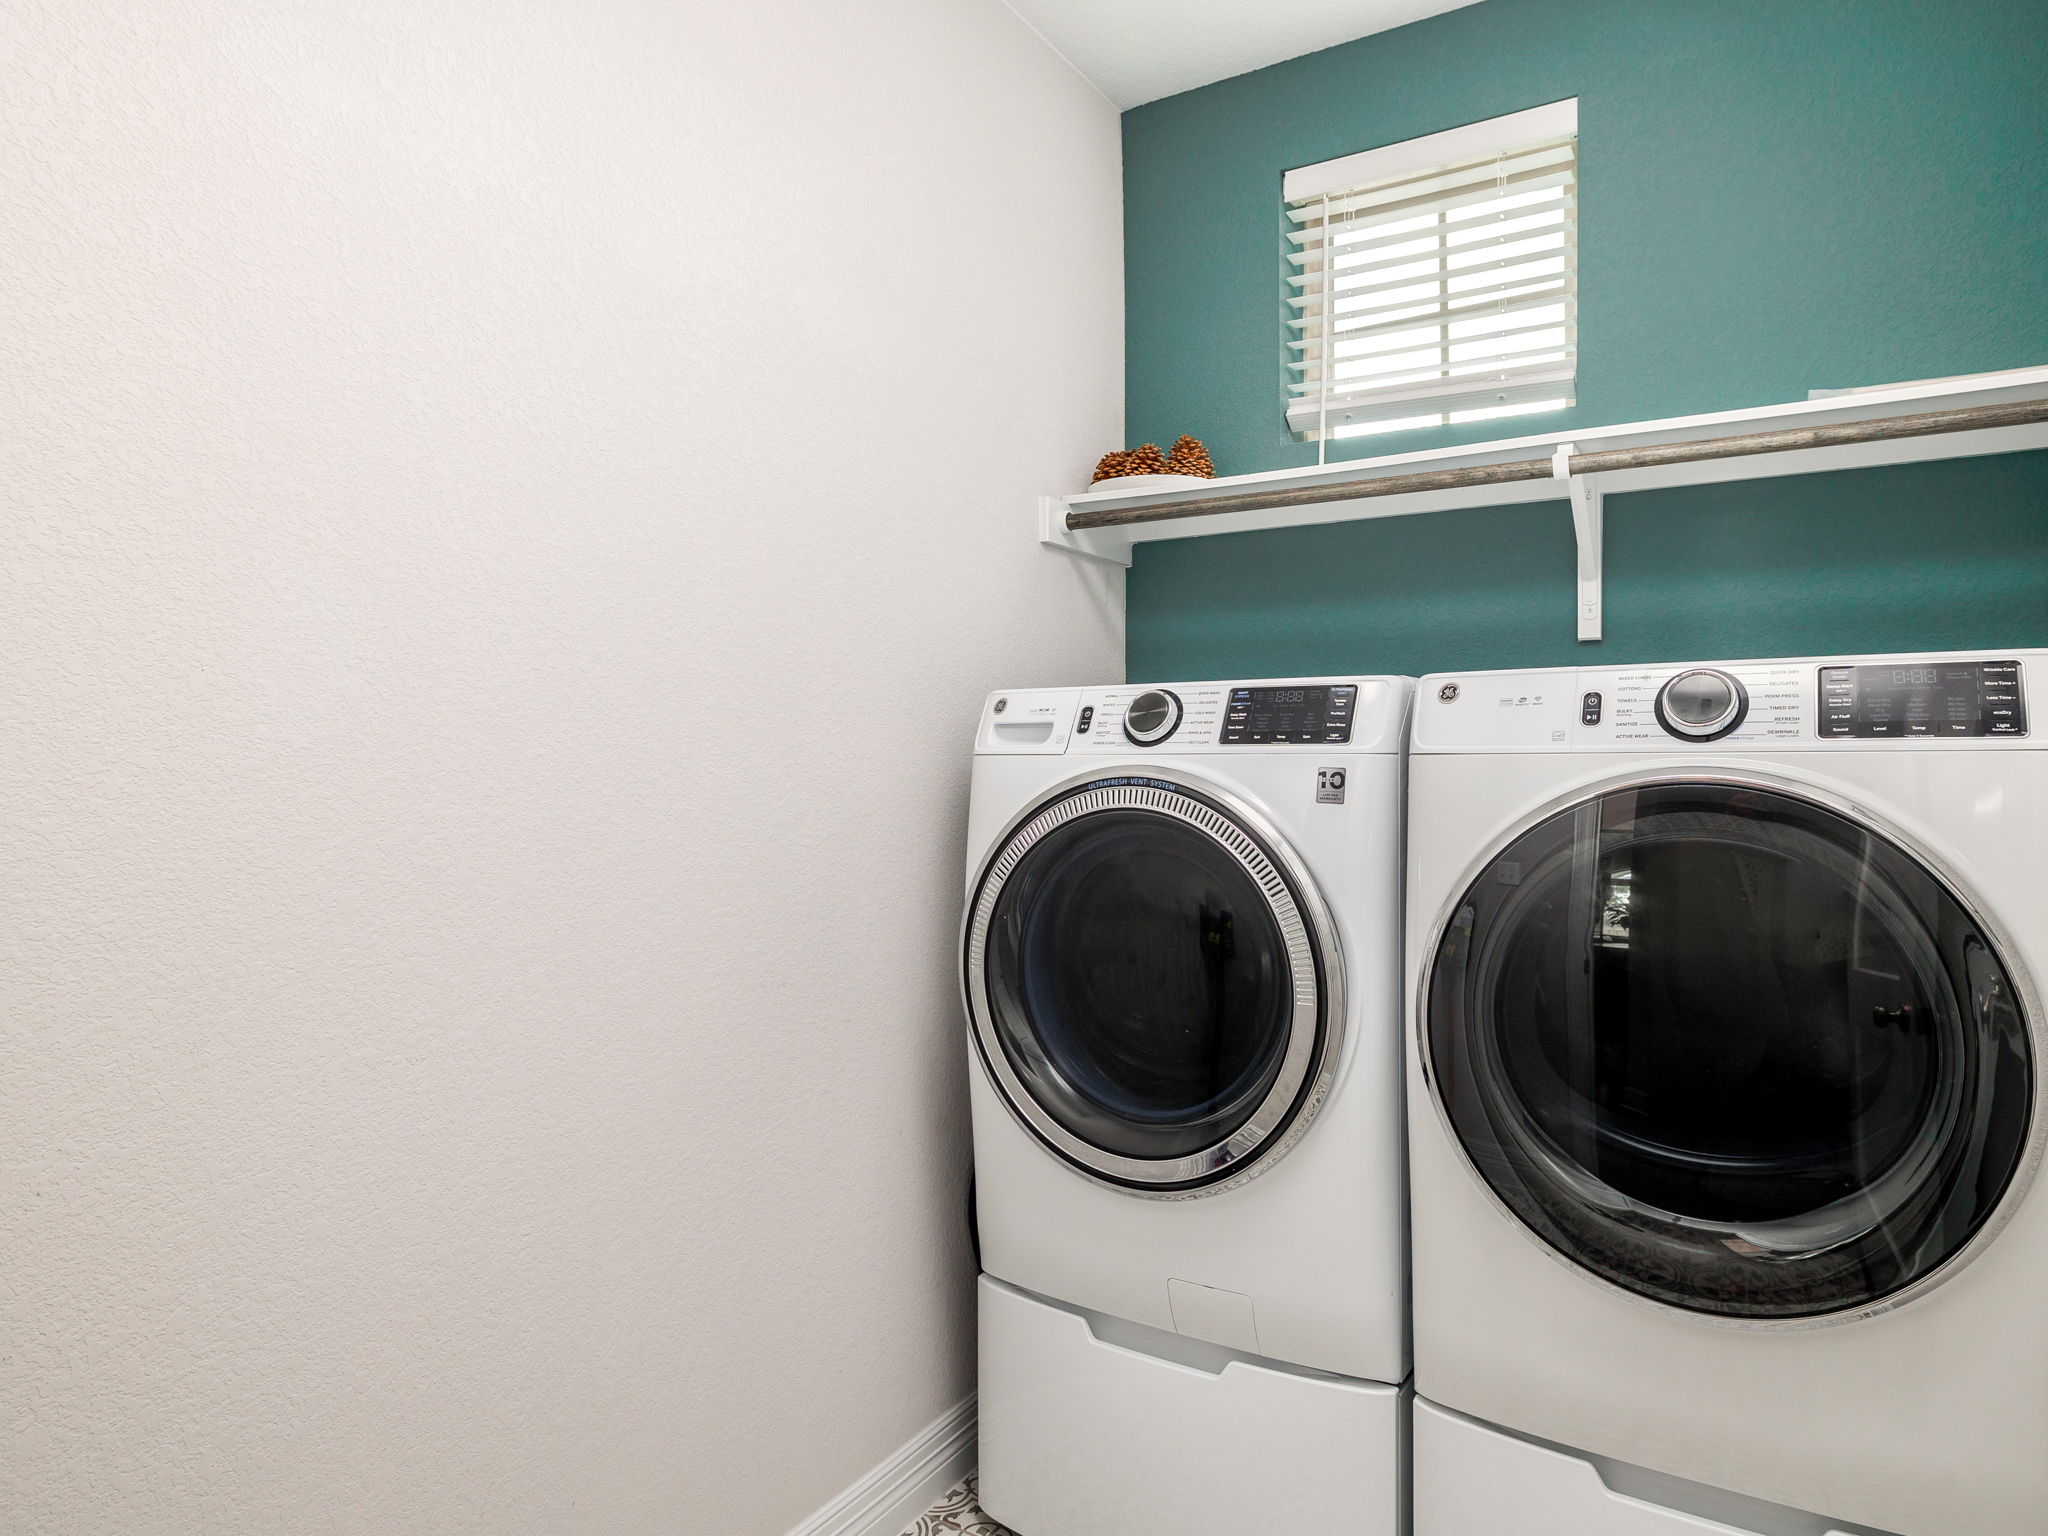 The green accent wall and spanish tile flooring make the laundry room a fun place to pop into!